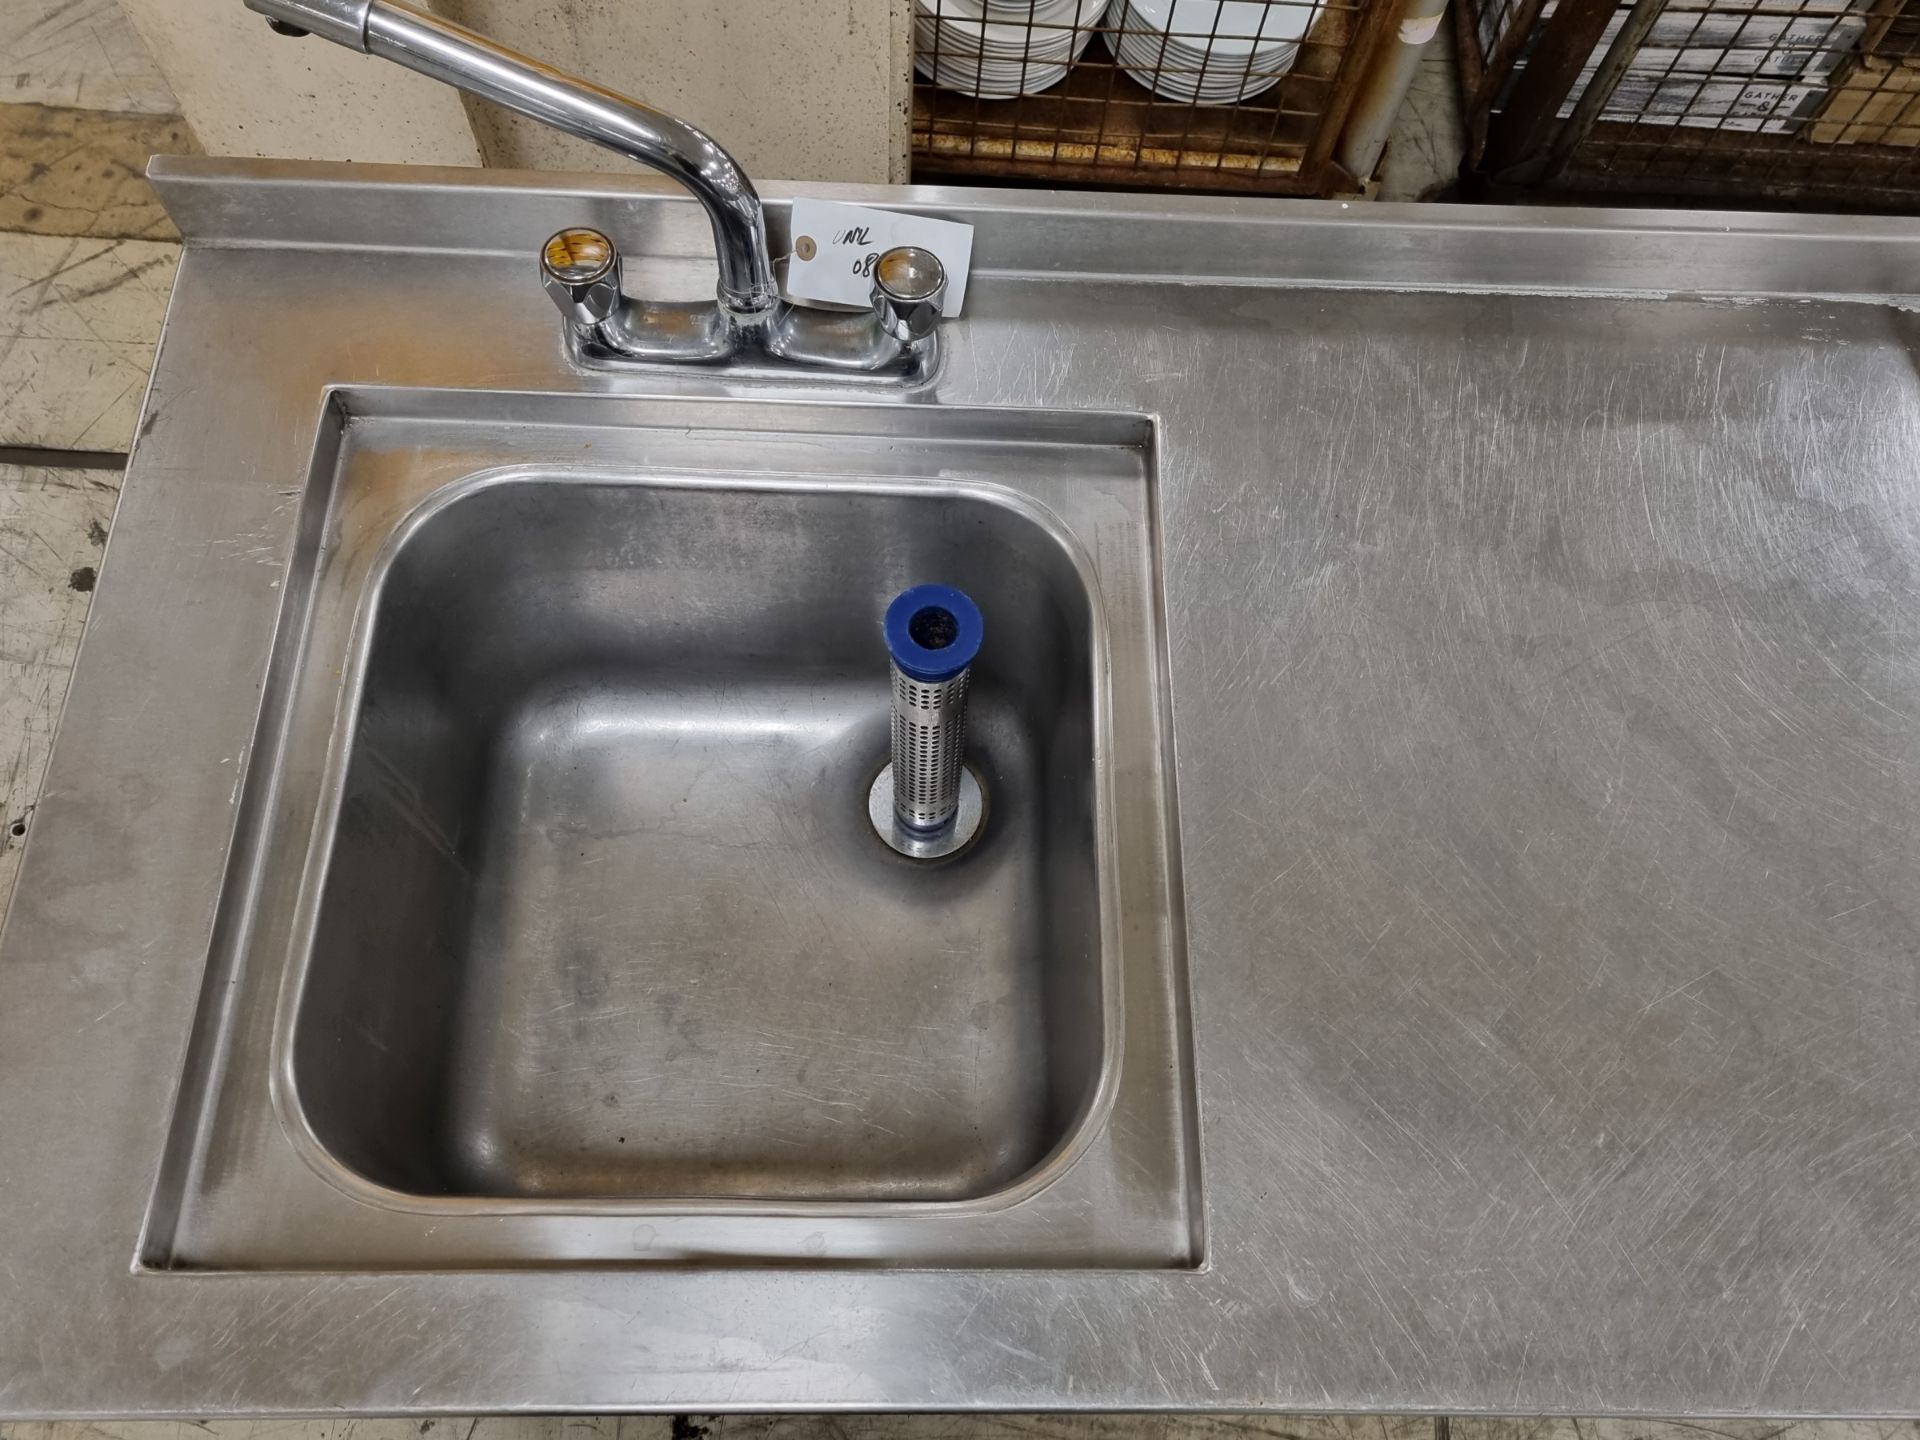 Stainless steel sink unit with side counter attachment - 55x188x96cm - Image 2 of 6